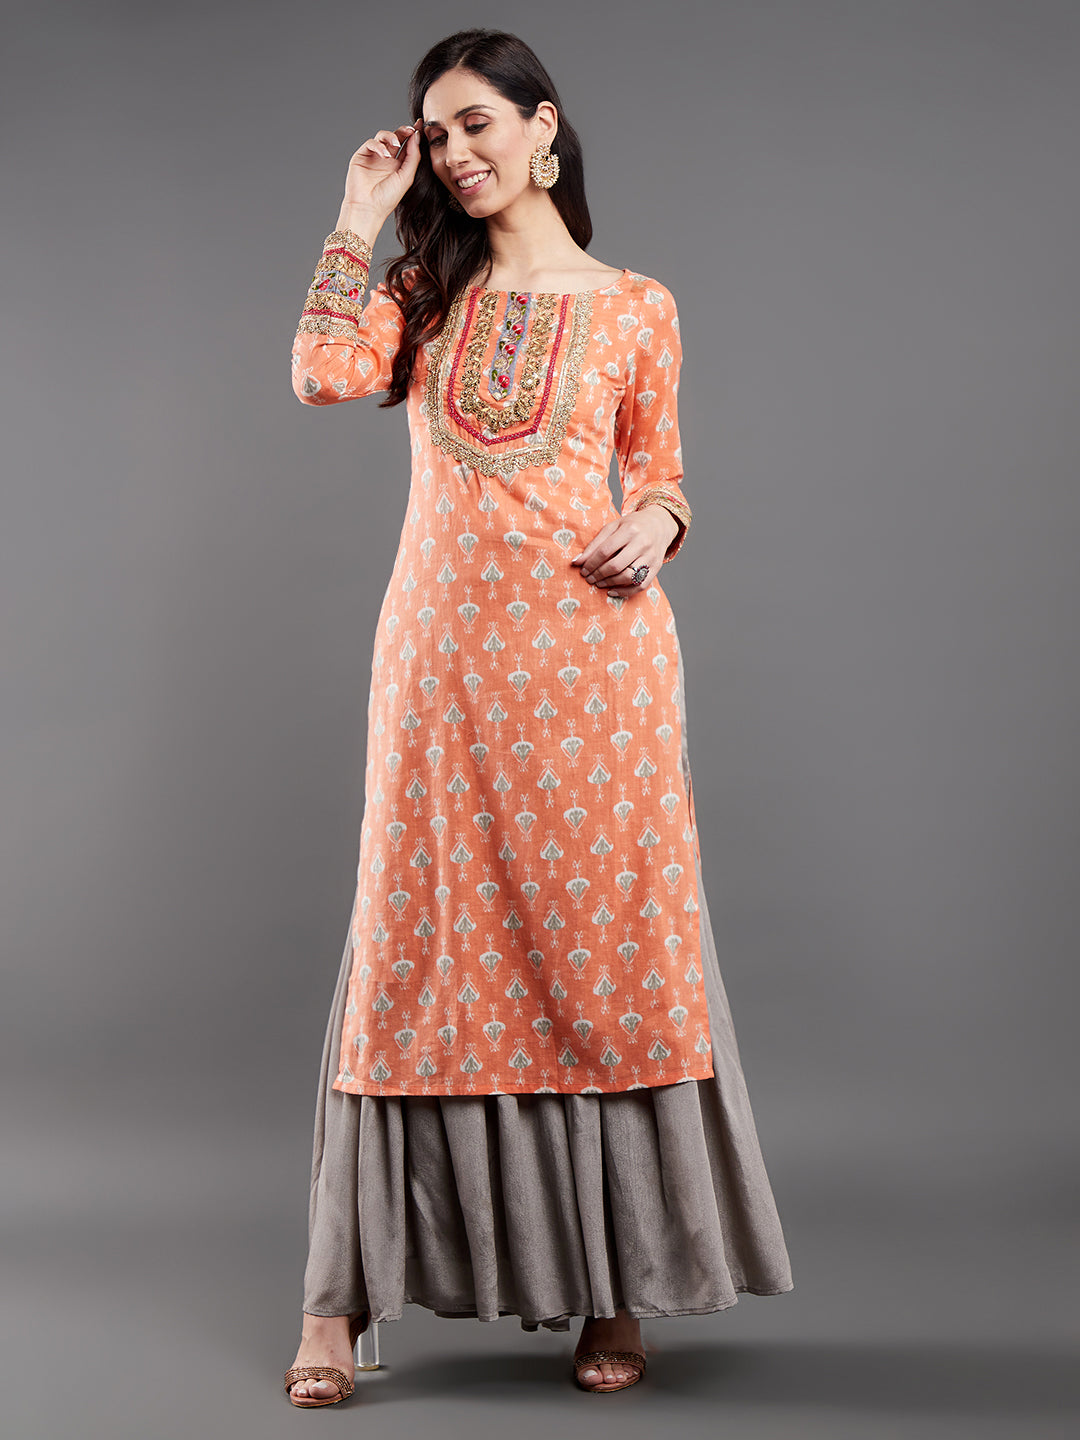 Peach Printed Kurta With Lace Details